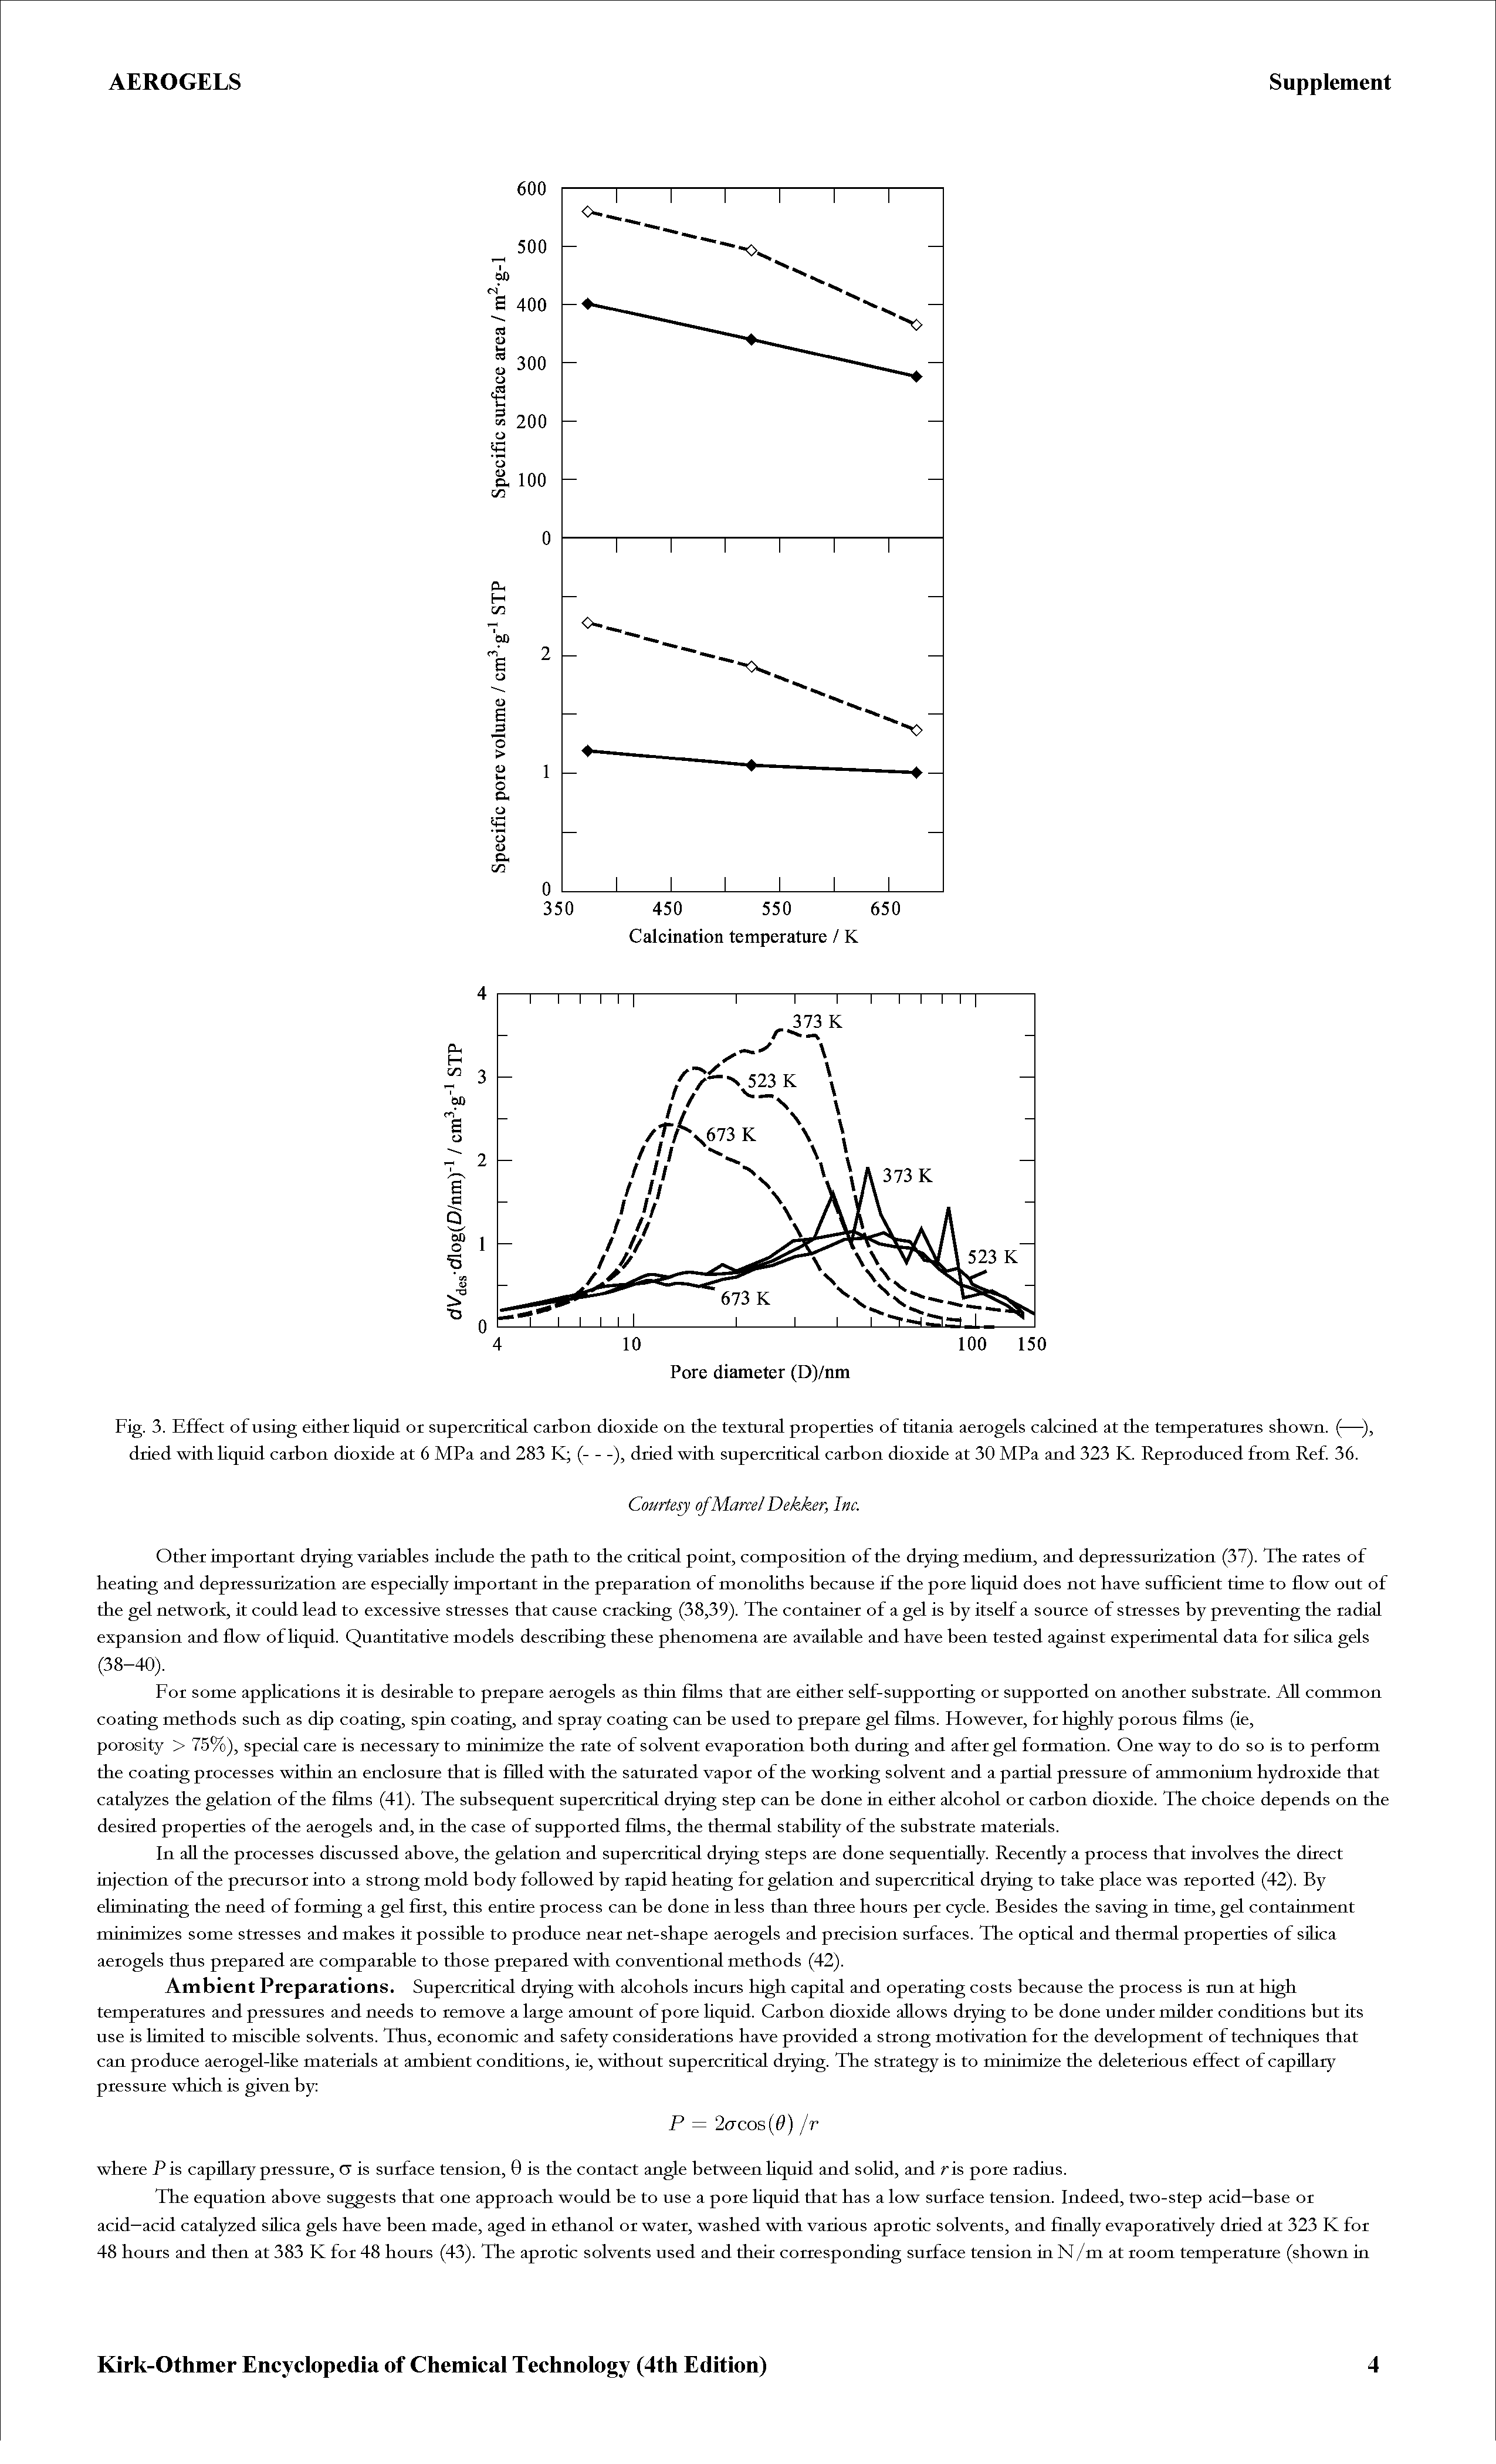 Fig. 3. Effect of using either liquid or supercritical carbon dioxide on the textural properties of titania aerogels calcined at the temperatures shown. (—), dried with Hquid carbon dioxide at 6 MPa and 283 K (-------), dried with supercritical carbon dioxide at 30 MPa and 323 K. Reproduced from Ref. 36.